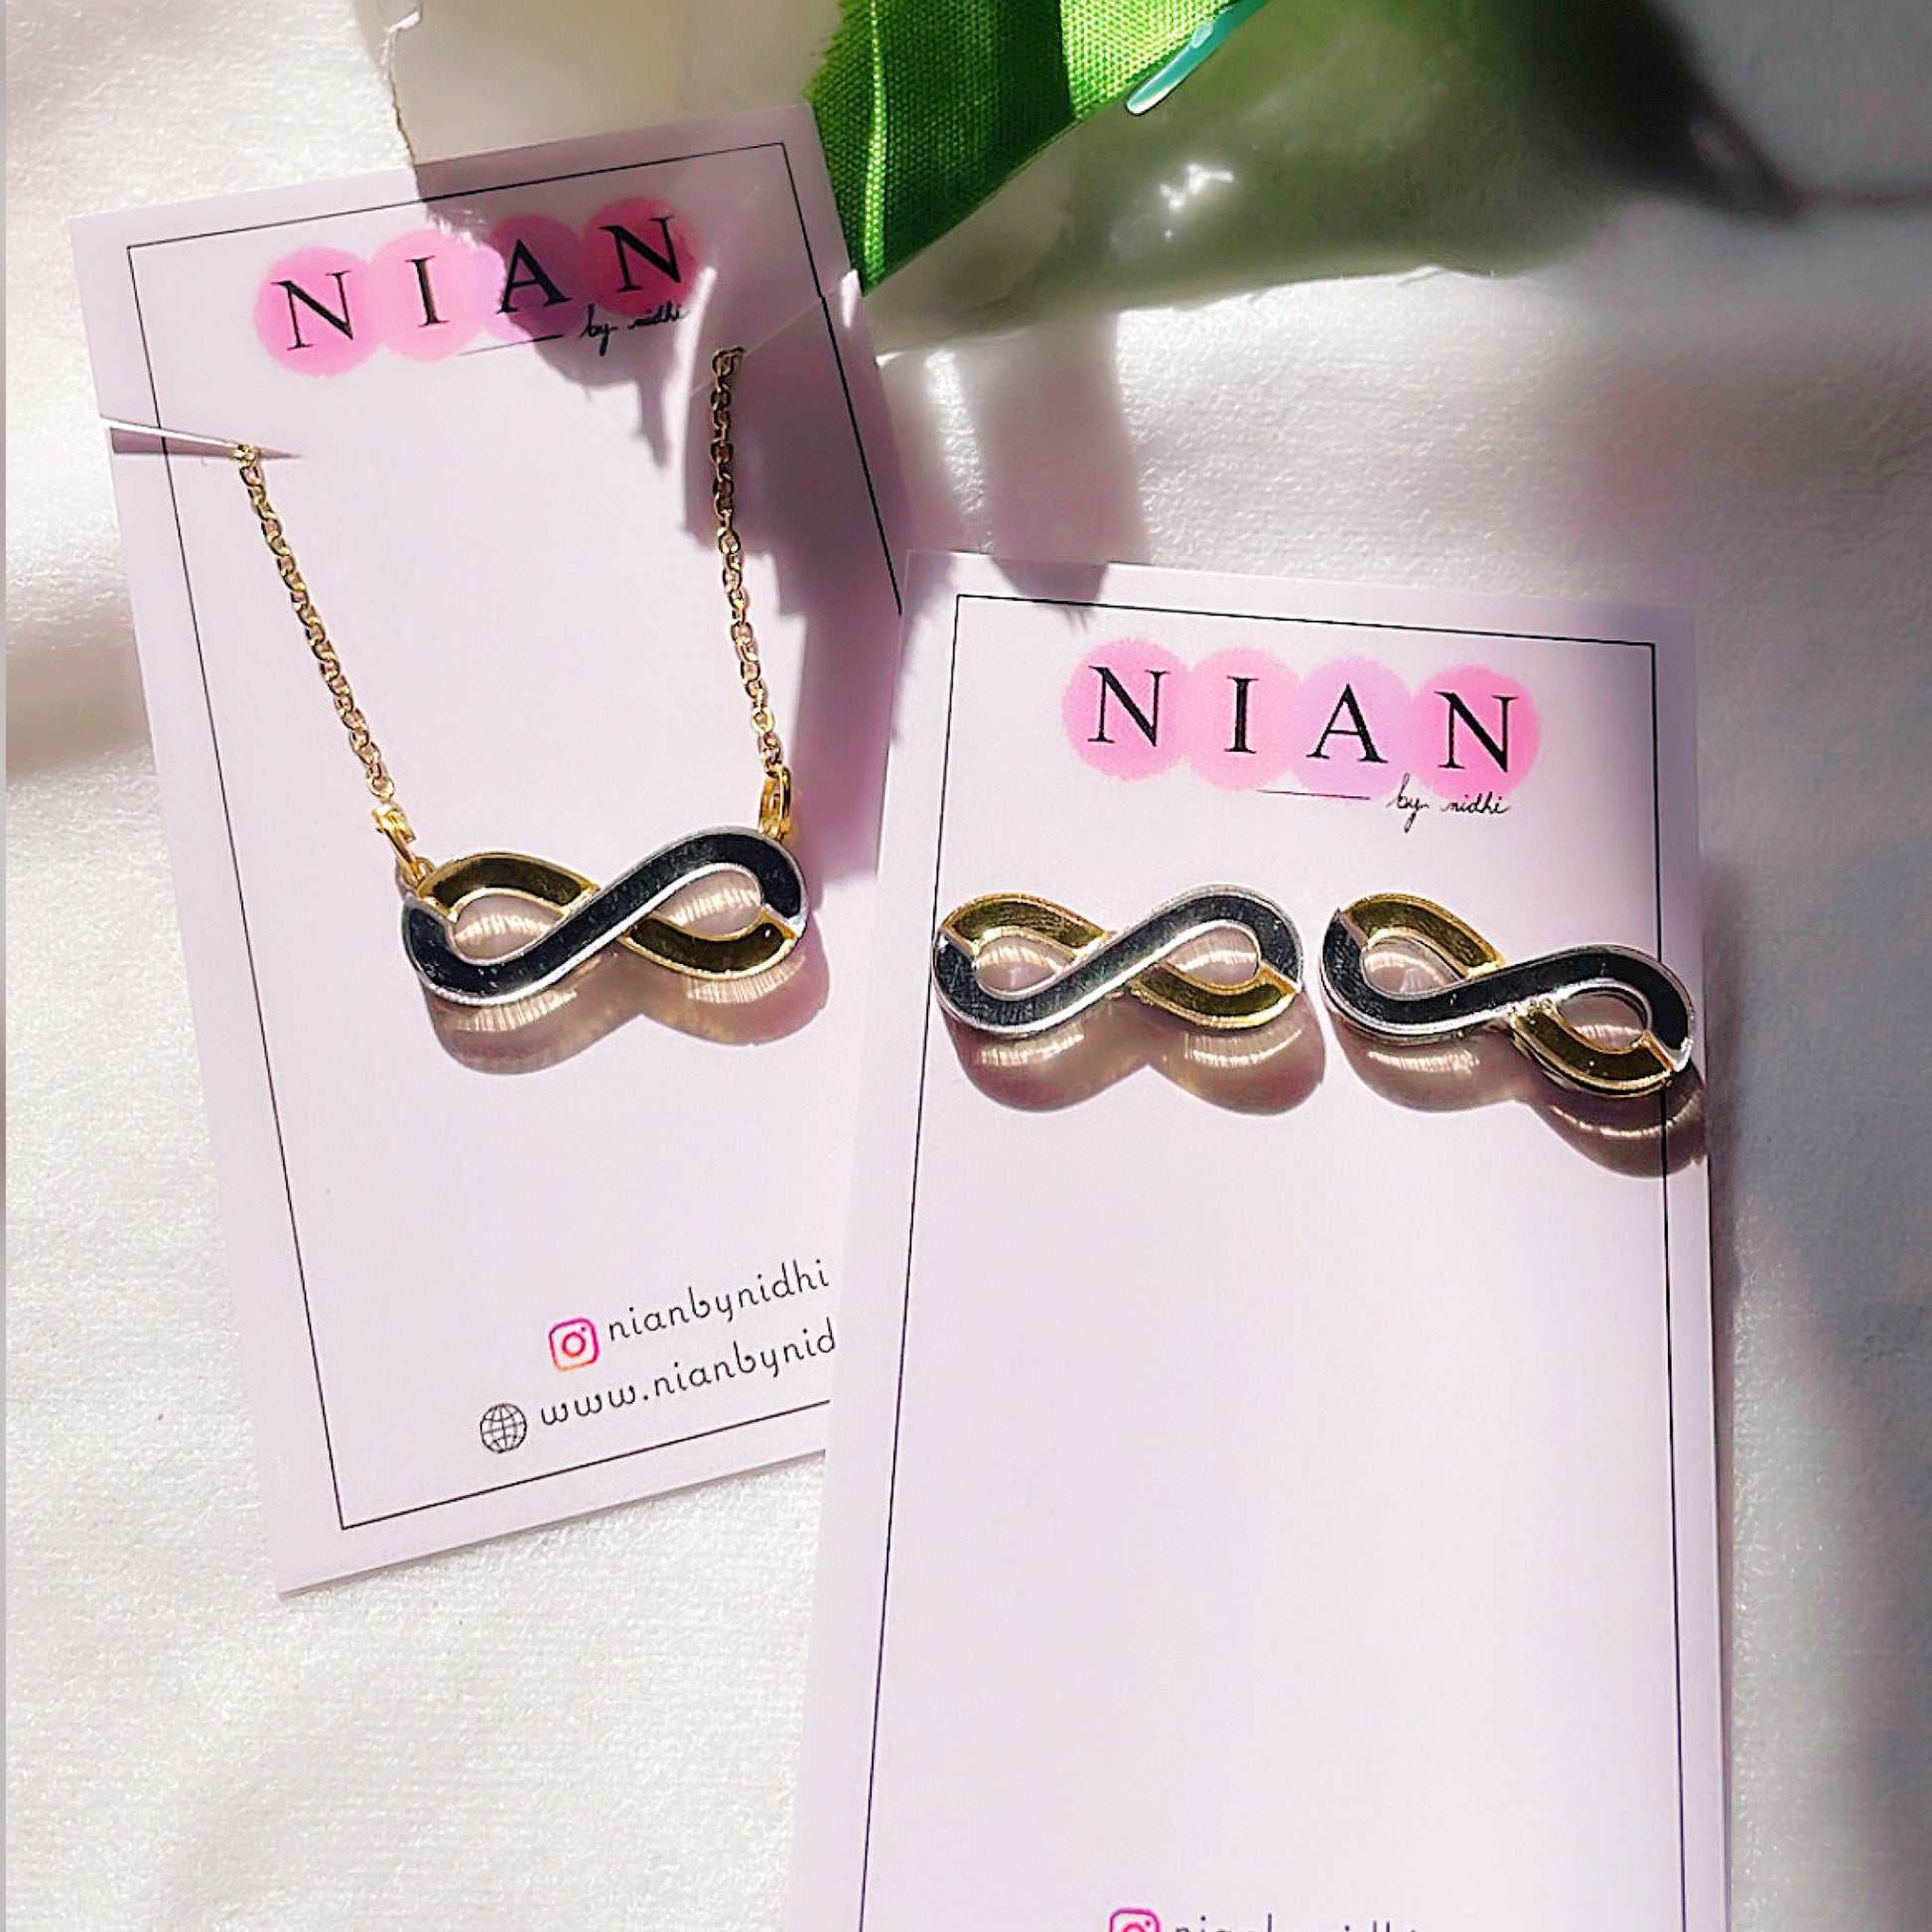 Infinity Combo (Set of 2) - Glossy Golden and Silver - Nian by Nidhi - comprises two products - Infinity Necklace and Infinity Studs - placed in a white and green background